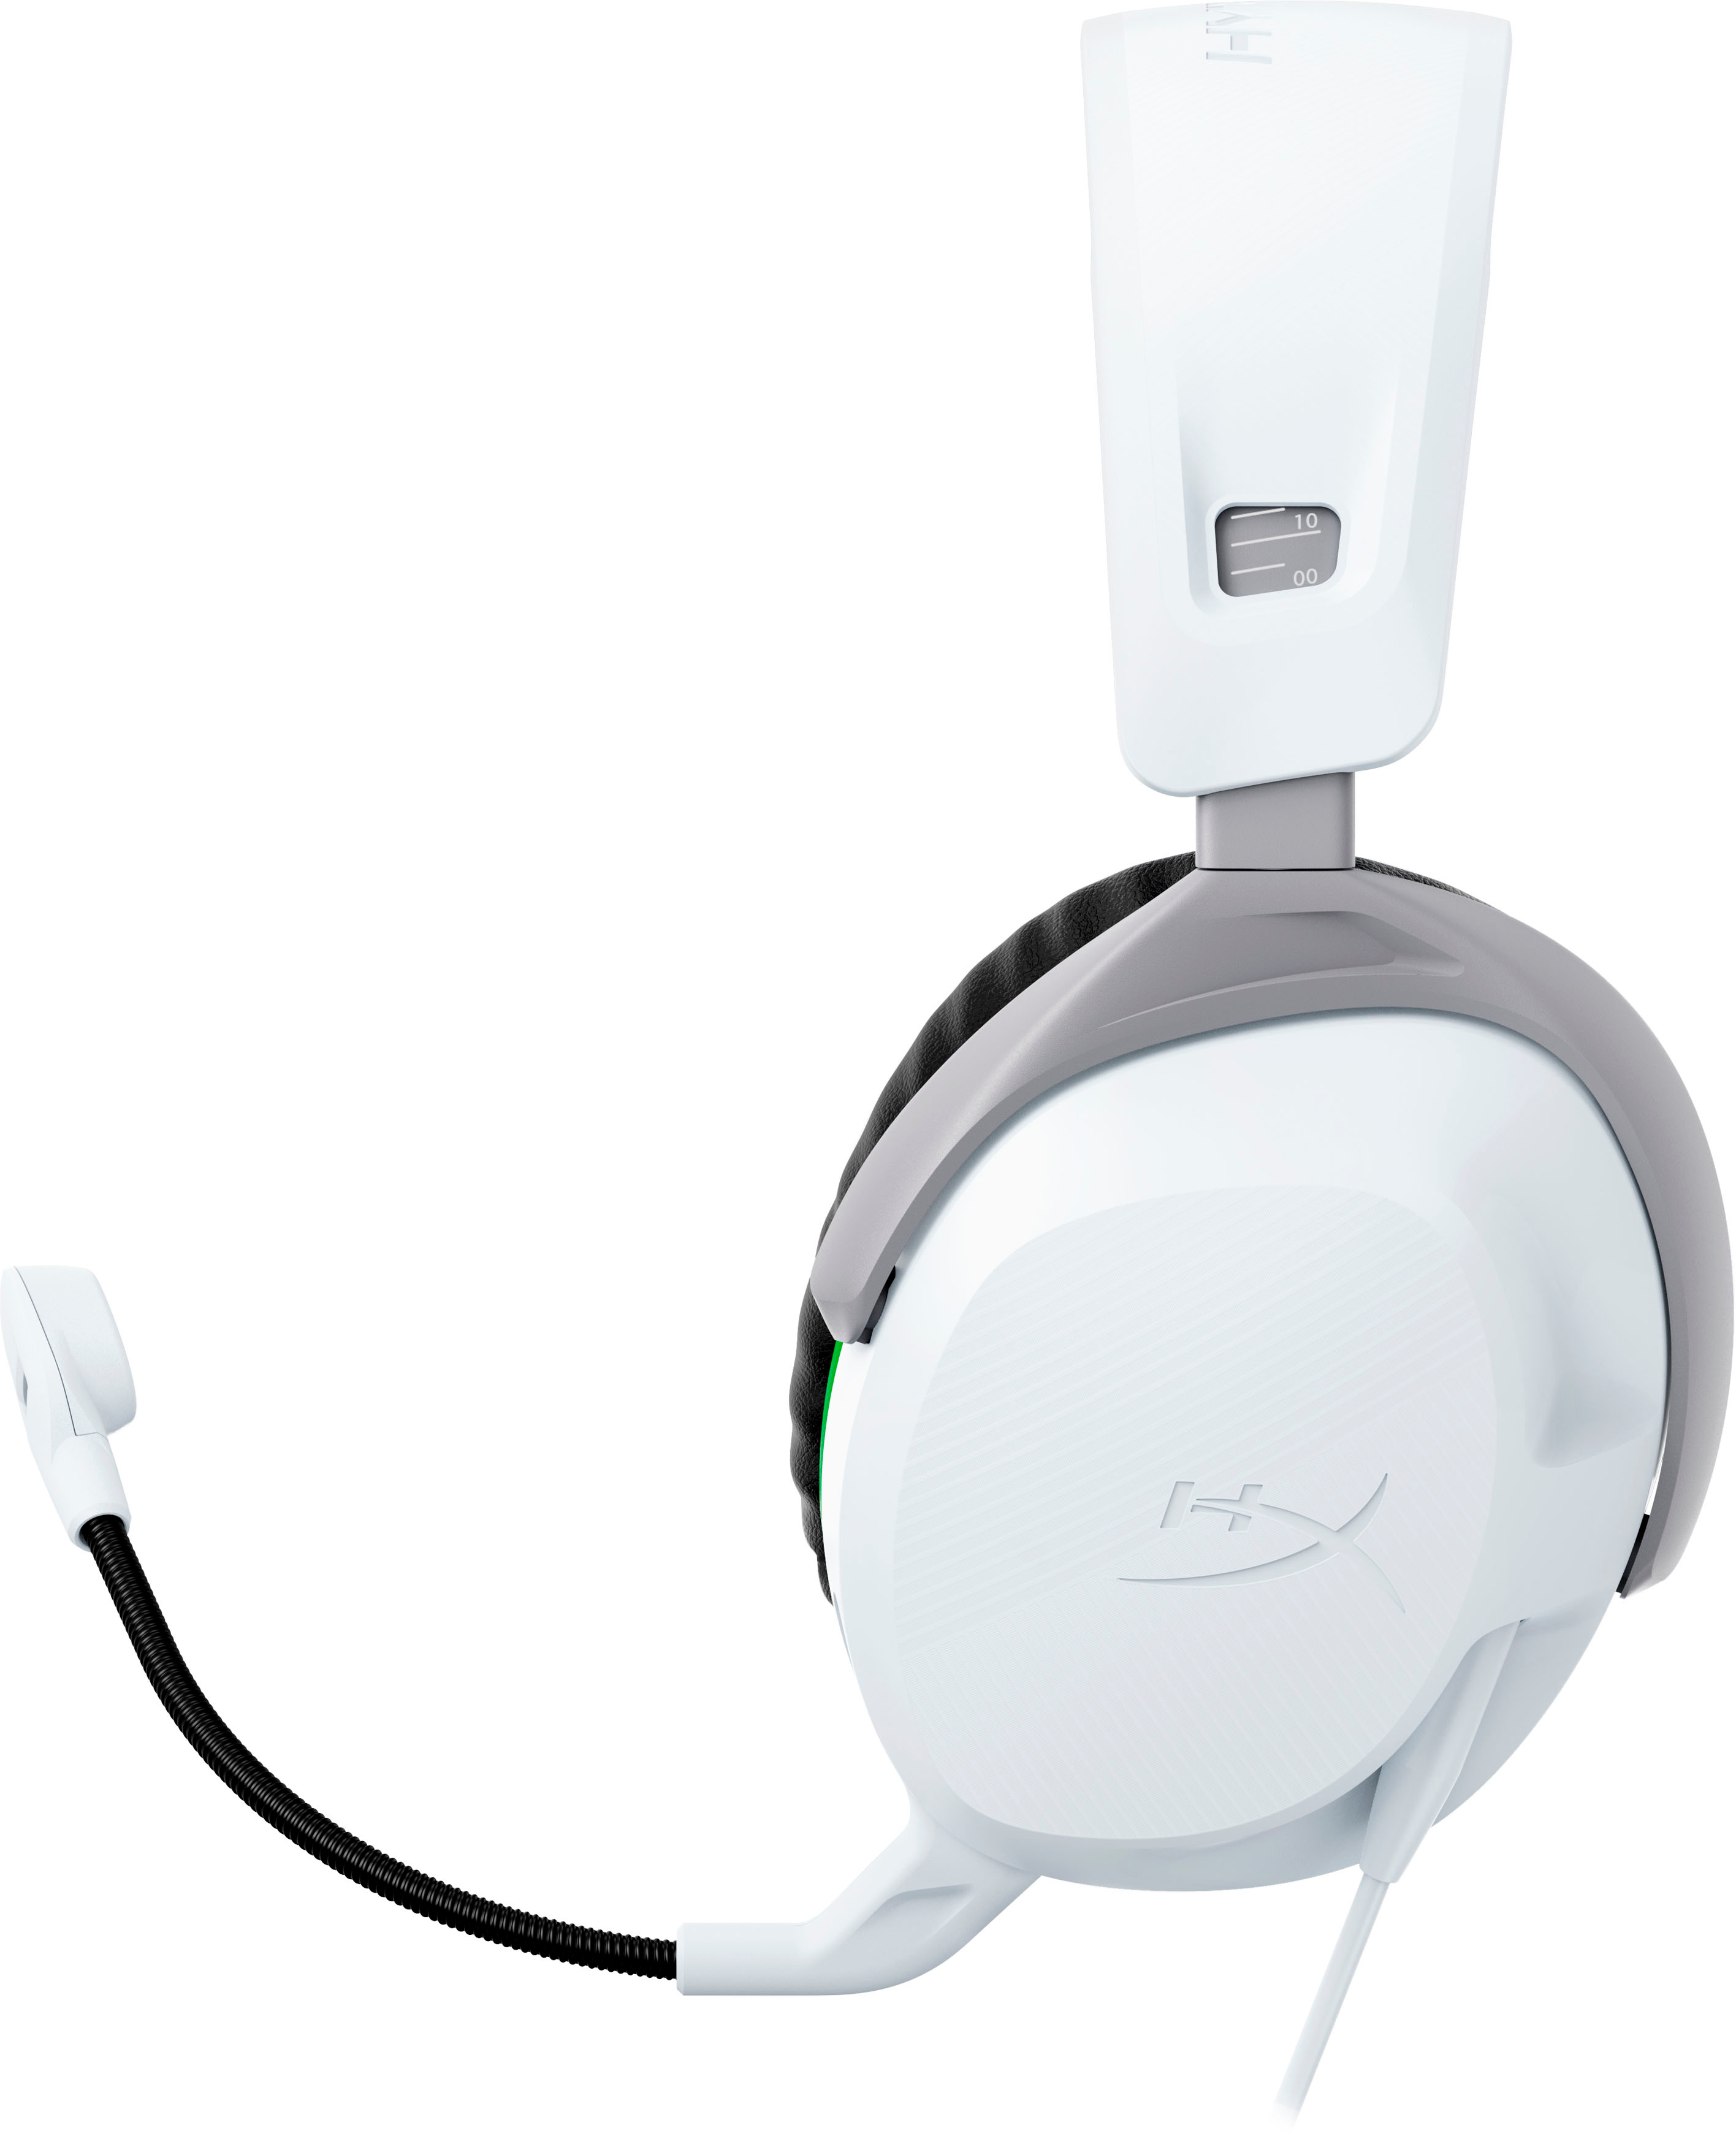 HyperX CloudX Stinger 2 Wired Best for Gaming Buy Headset 75X28AA - Xbox White